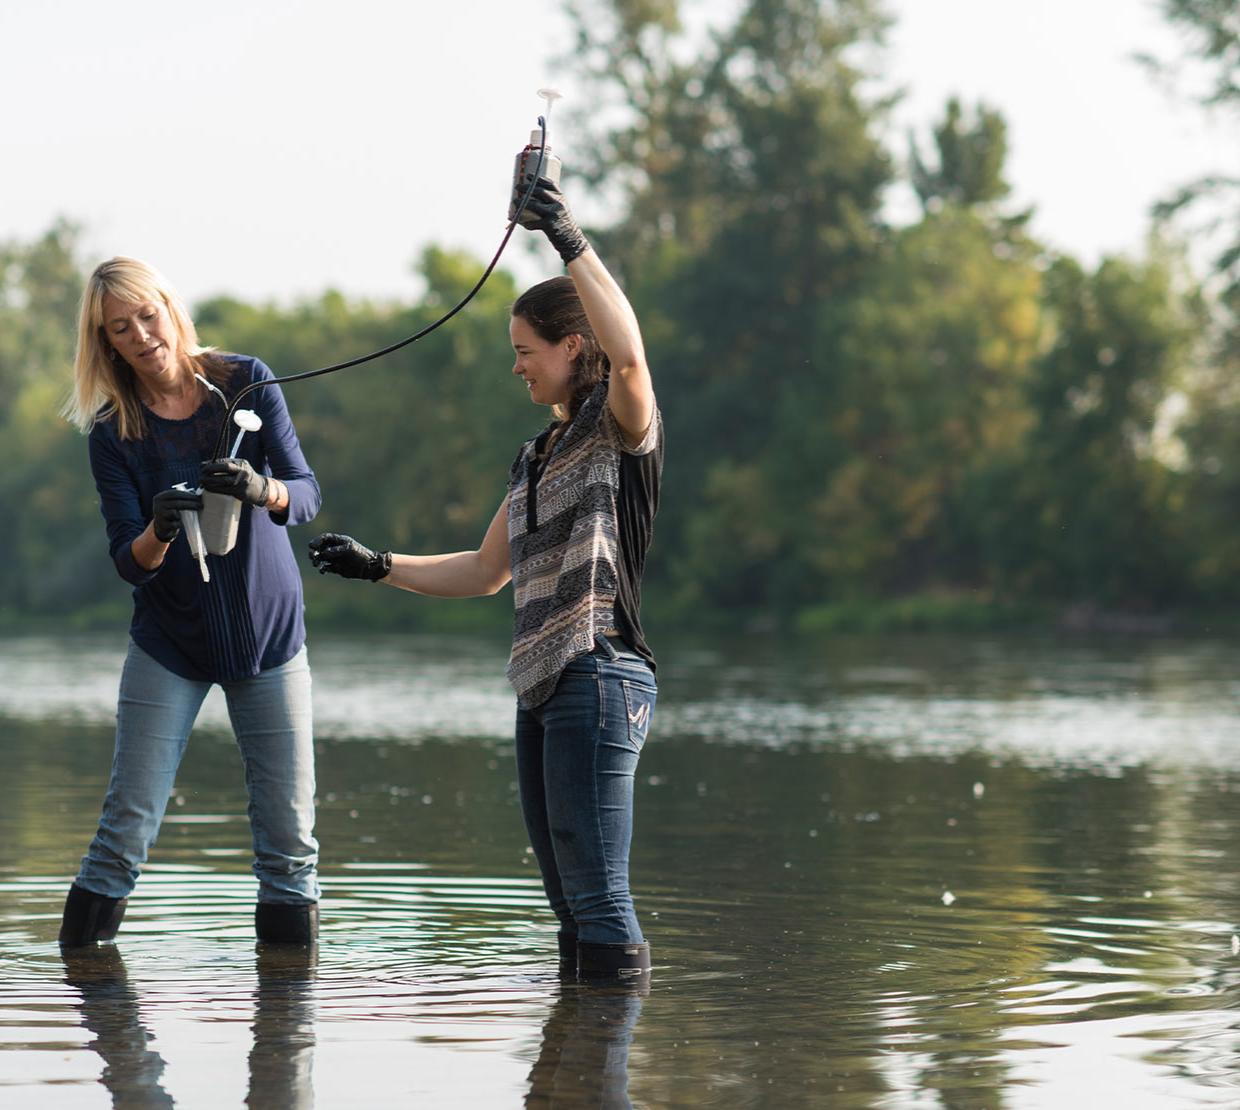 Kim Halsey and Cleo Davie-Martin collecting samples from a river.